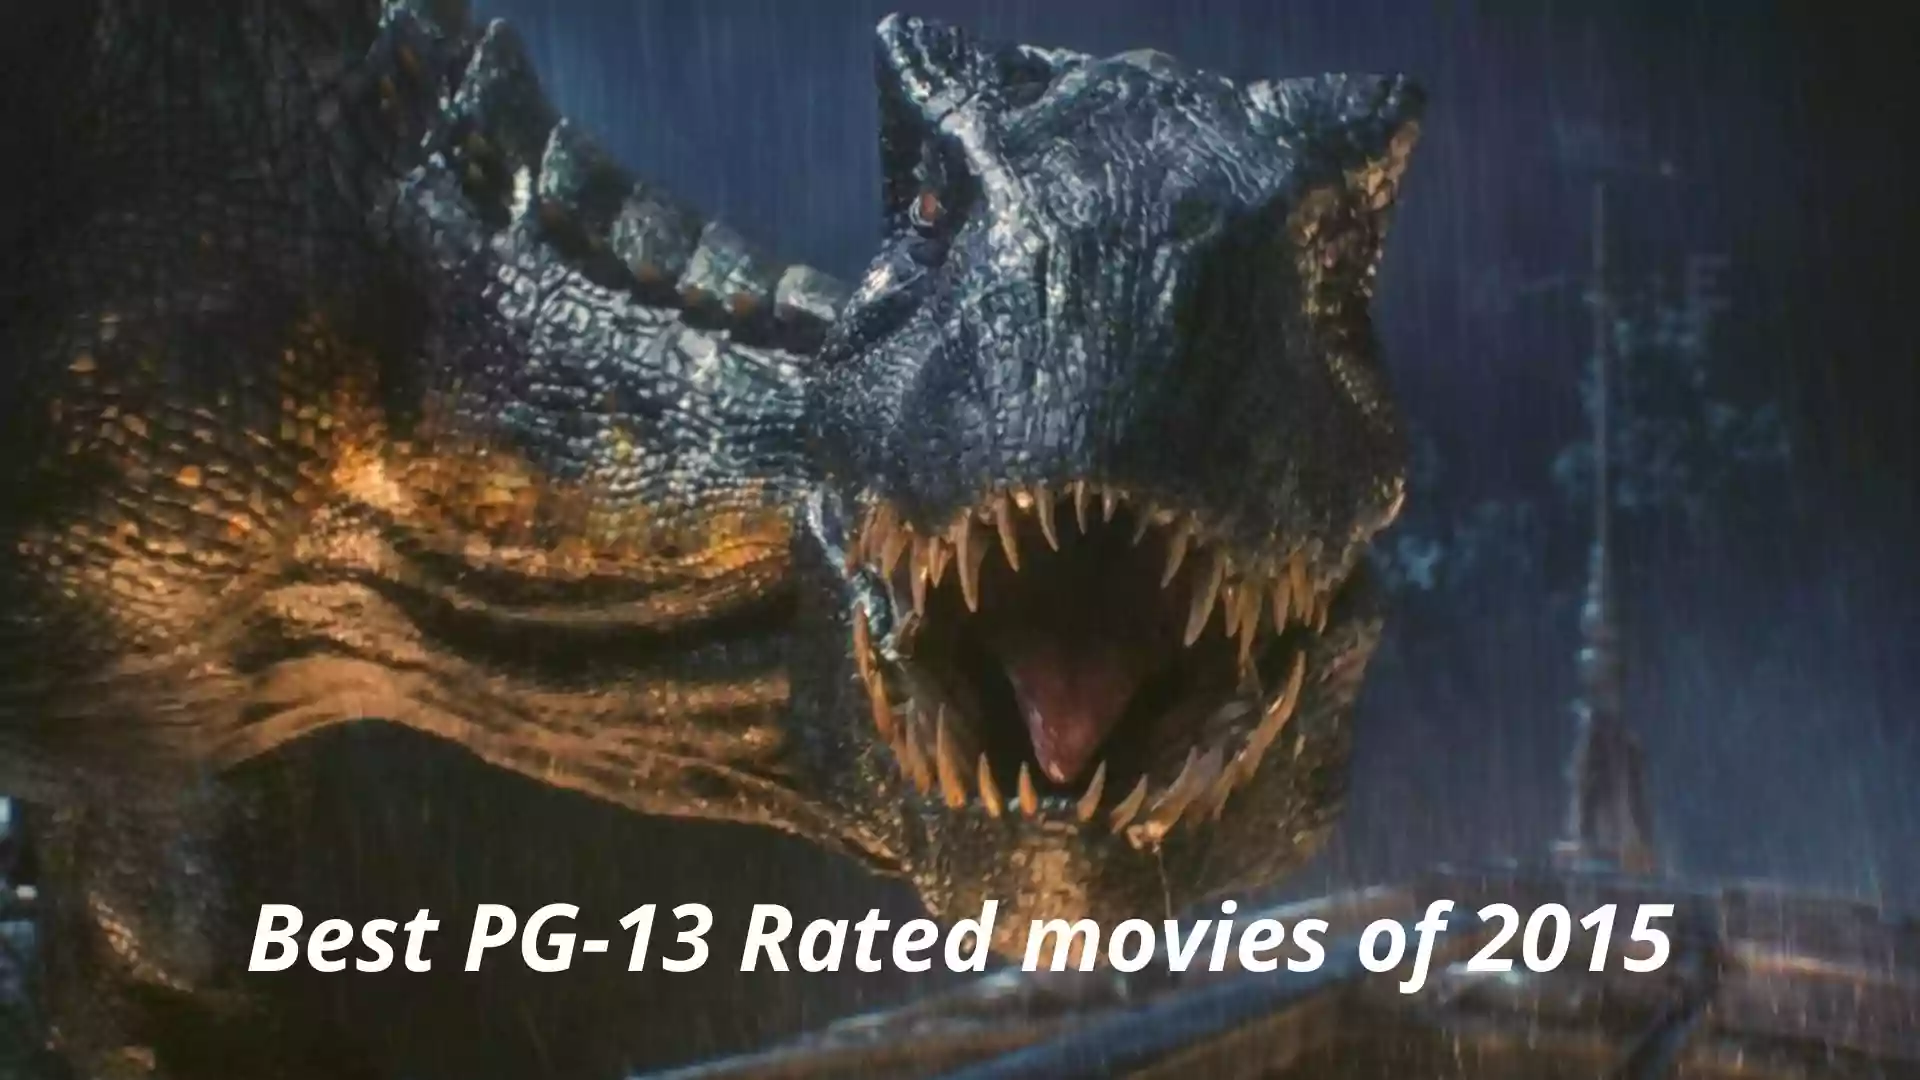 Best PG-13 Rated movies of 2015